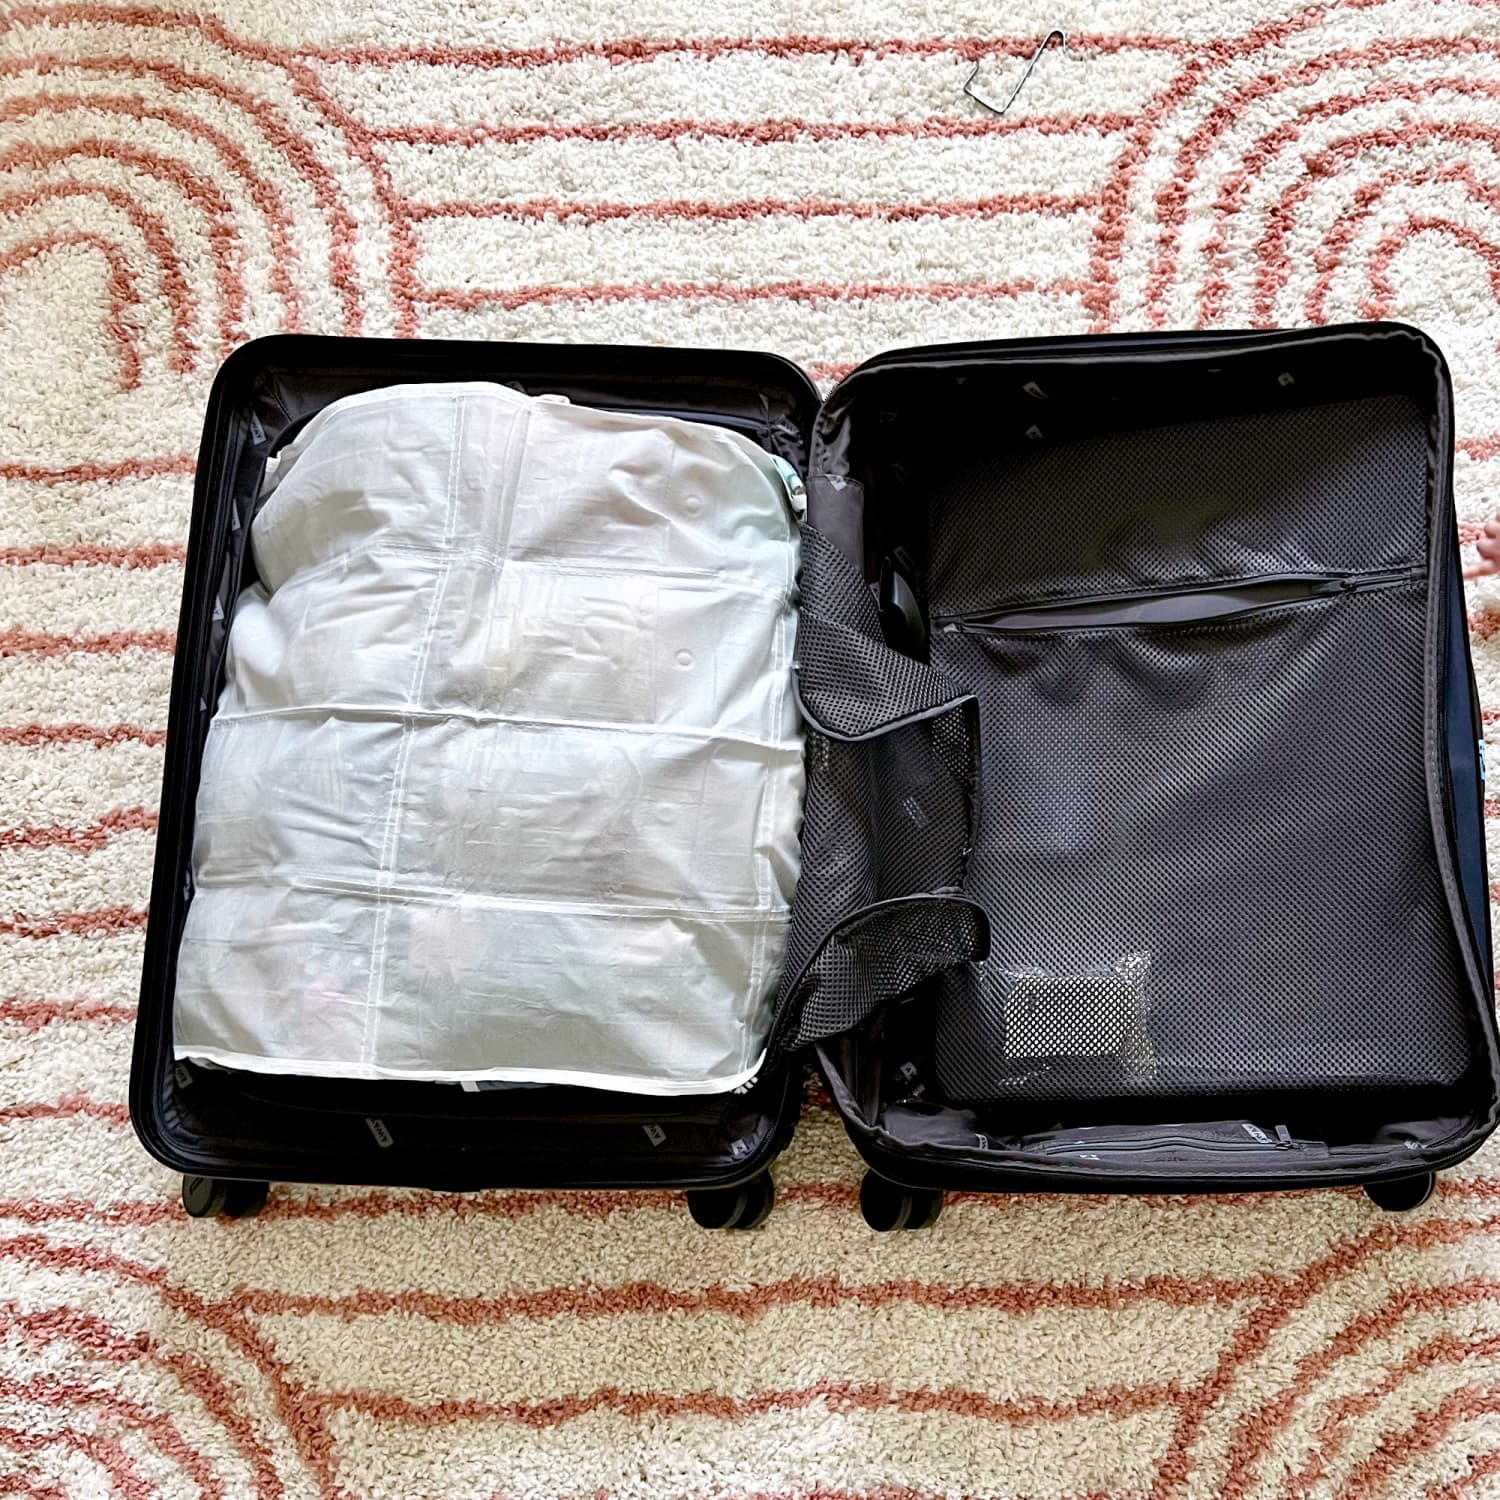 I Tried Packing My Kids' Suitcase Using a Shoe Organizer